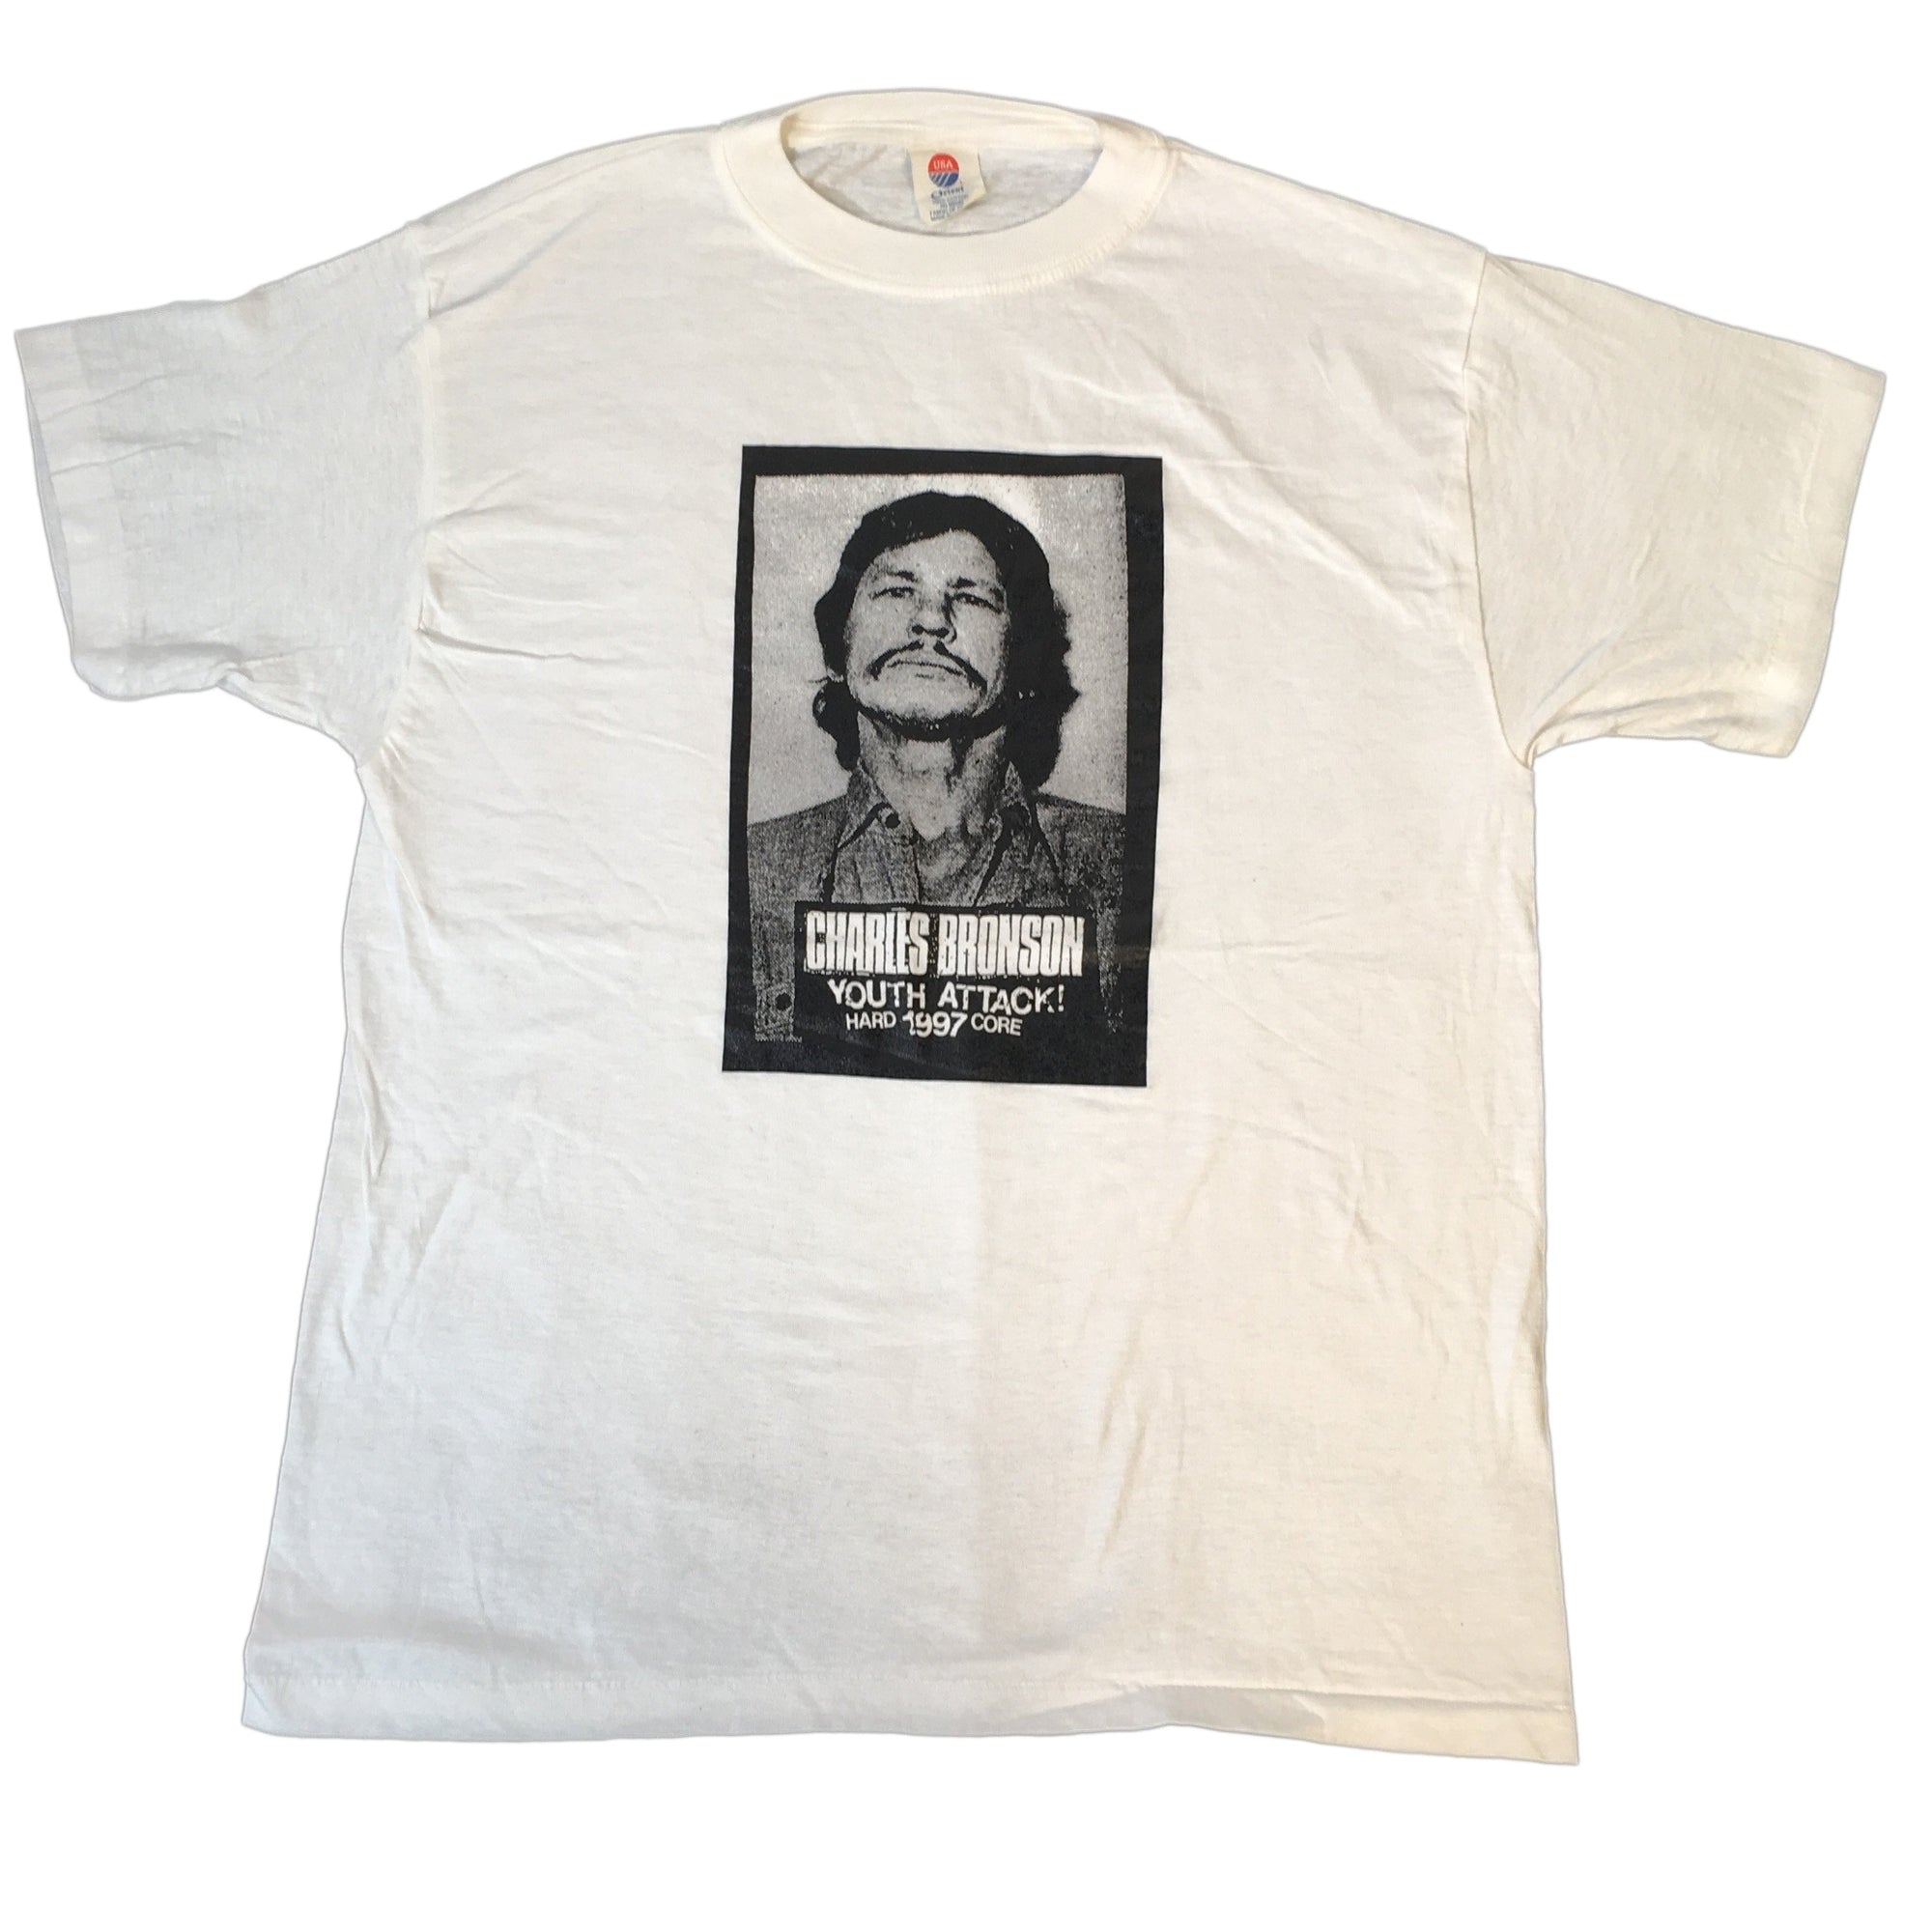 Vintage Charles Bronson "Youth Attack 97" T-Shirt - jointcustodydc